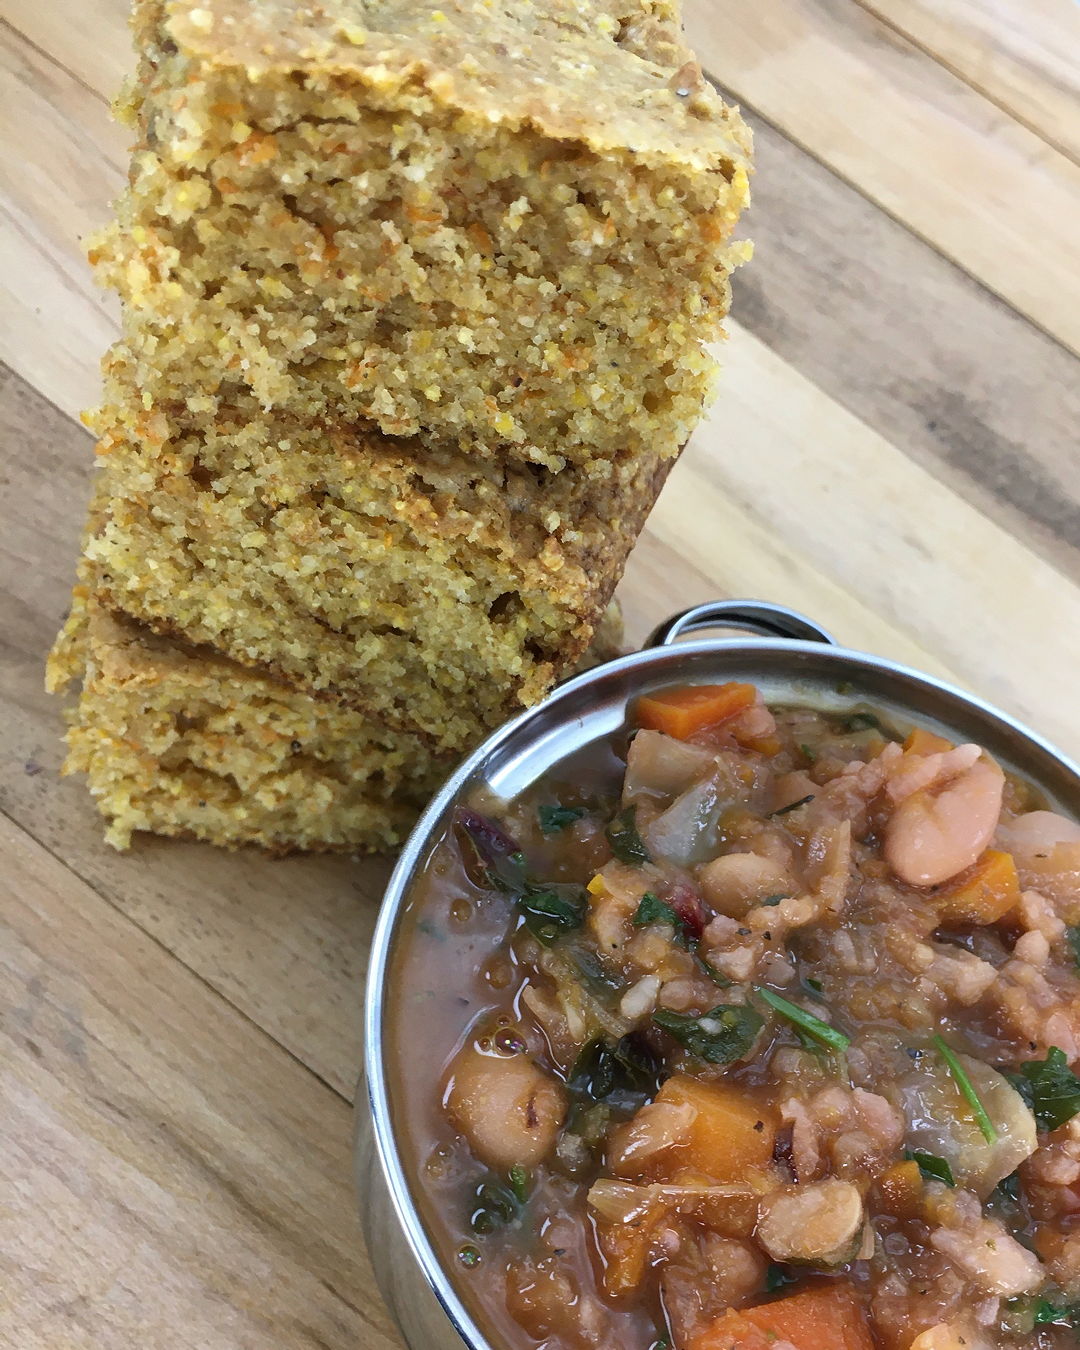 three pieces of cornbread piled atop each other and next to a small tureen of minestrone soup